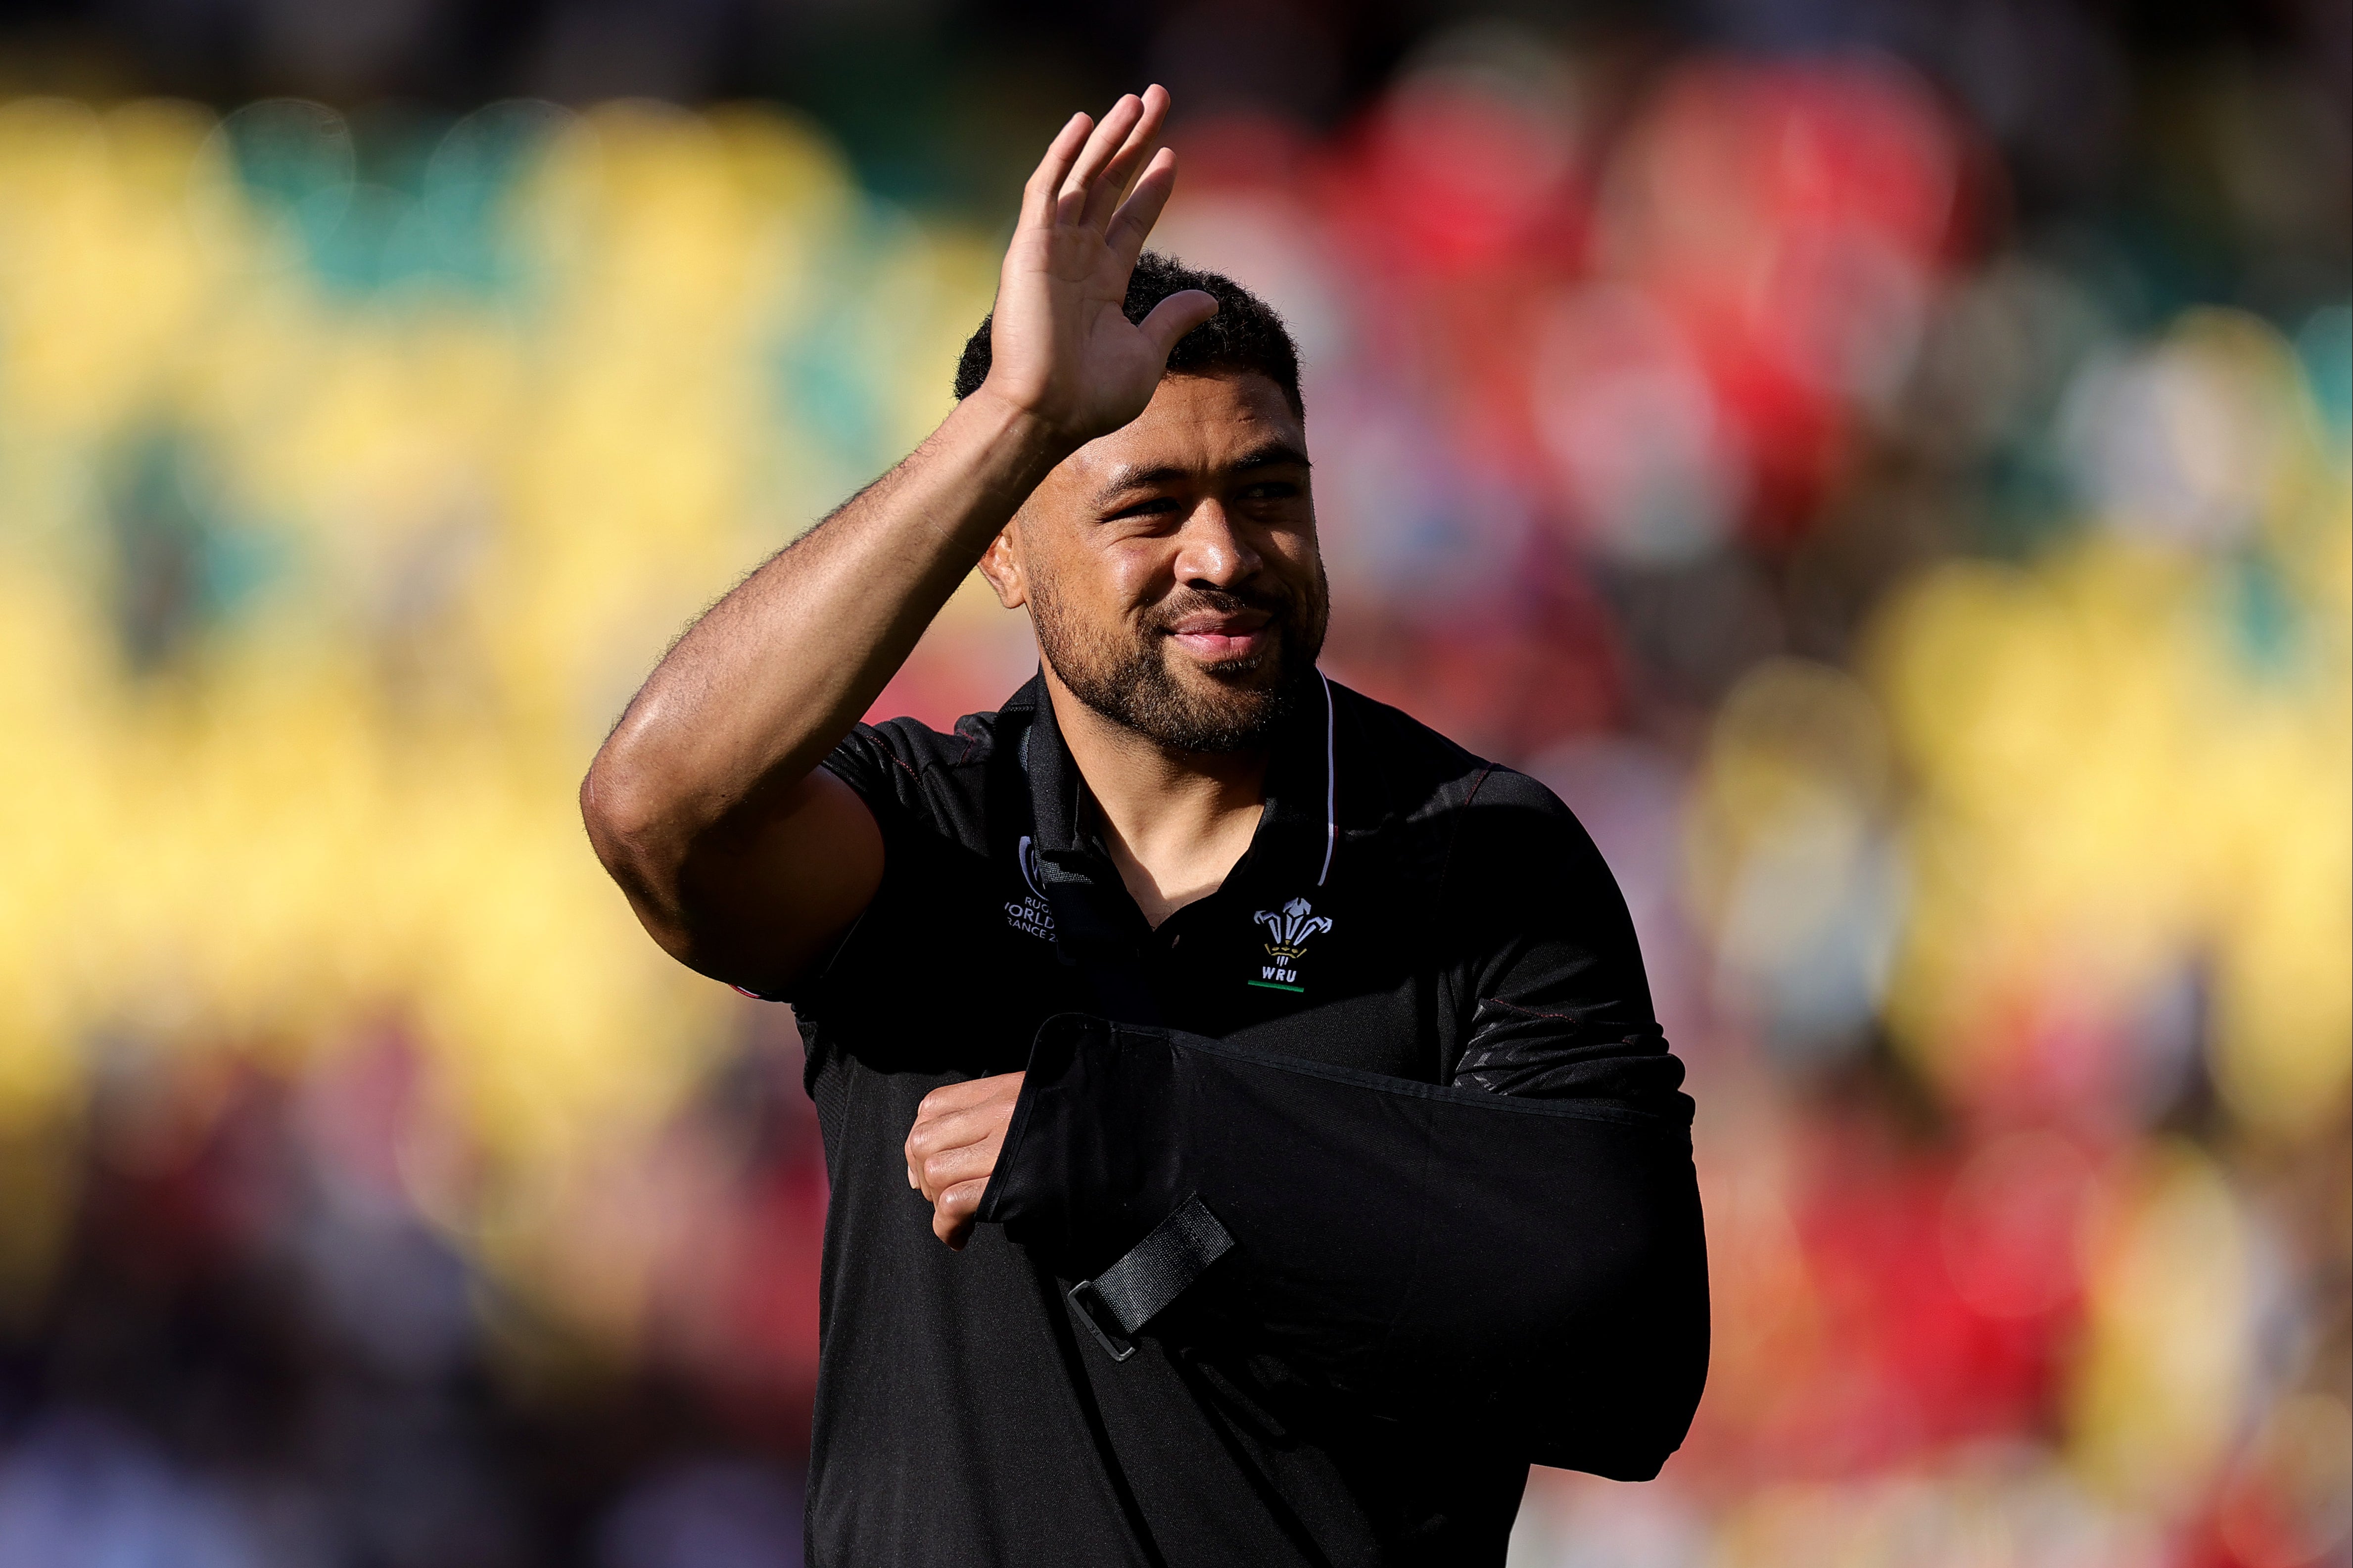 Taulupe Faletau has been ruled out of the tournament